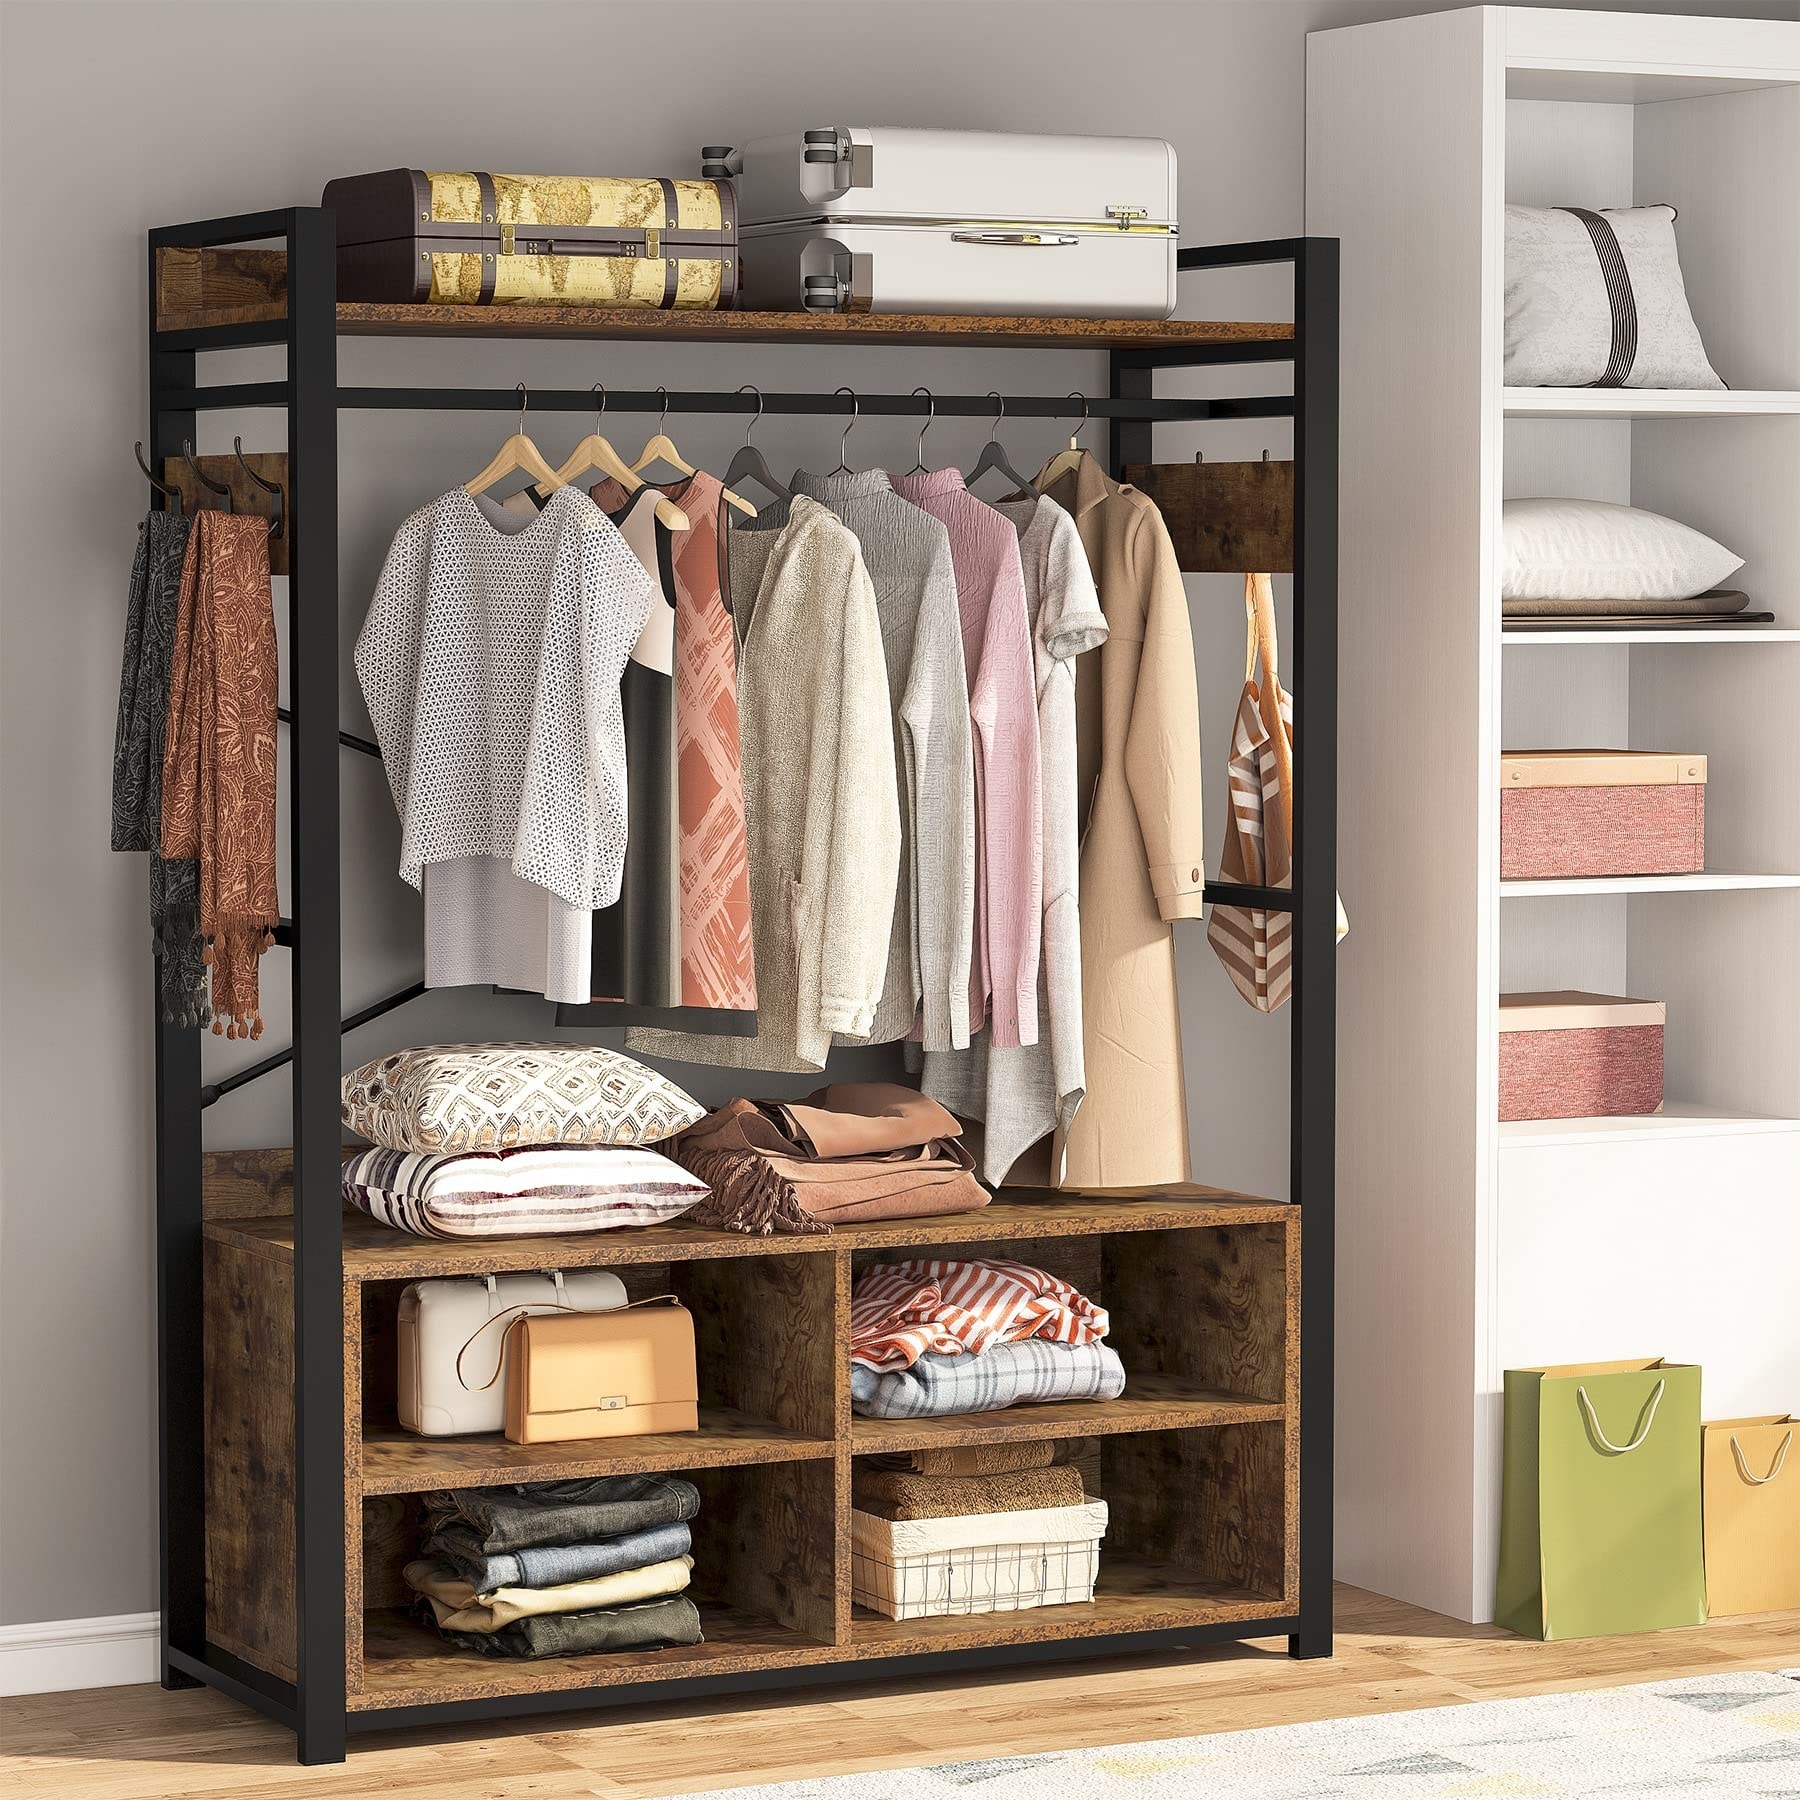 https://ak1.ostkcdn.com/images/products/is/images/direct/ff79a8dfb5a34e927c10eabee55cf409b39d20e6/Free-standing-Closet-Clothing-Rack%2C-Metal-Closet-Organizer-with-Shelves-and-Hooks%2C-Heavy-Duty-Clothes-Garment-Rack-Shelving.jpg